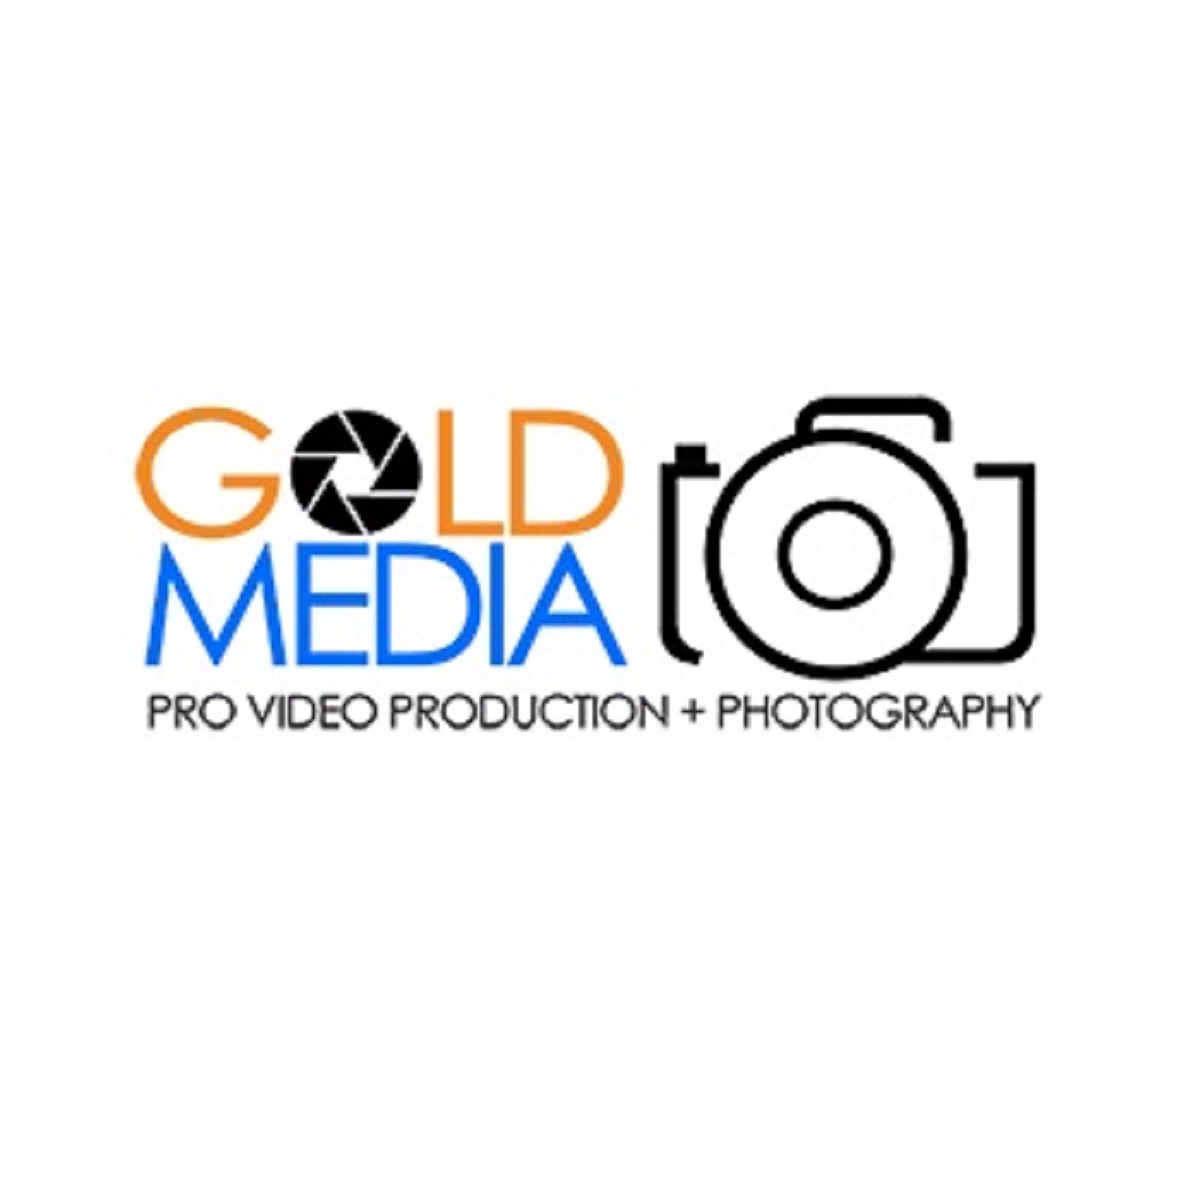 High Quality Corporate Video Production in Toronto